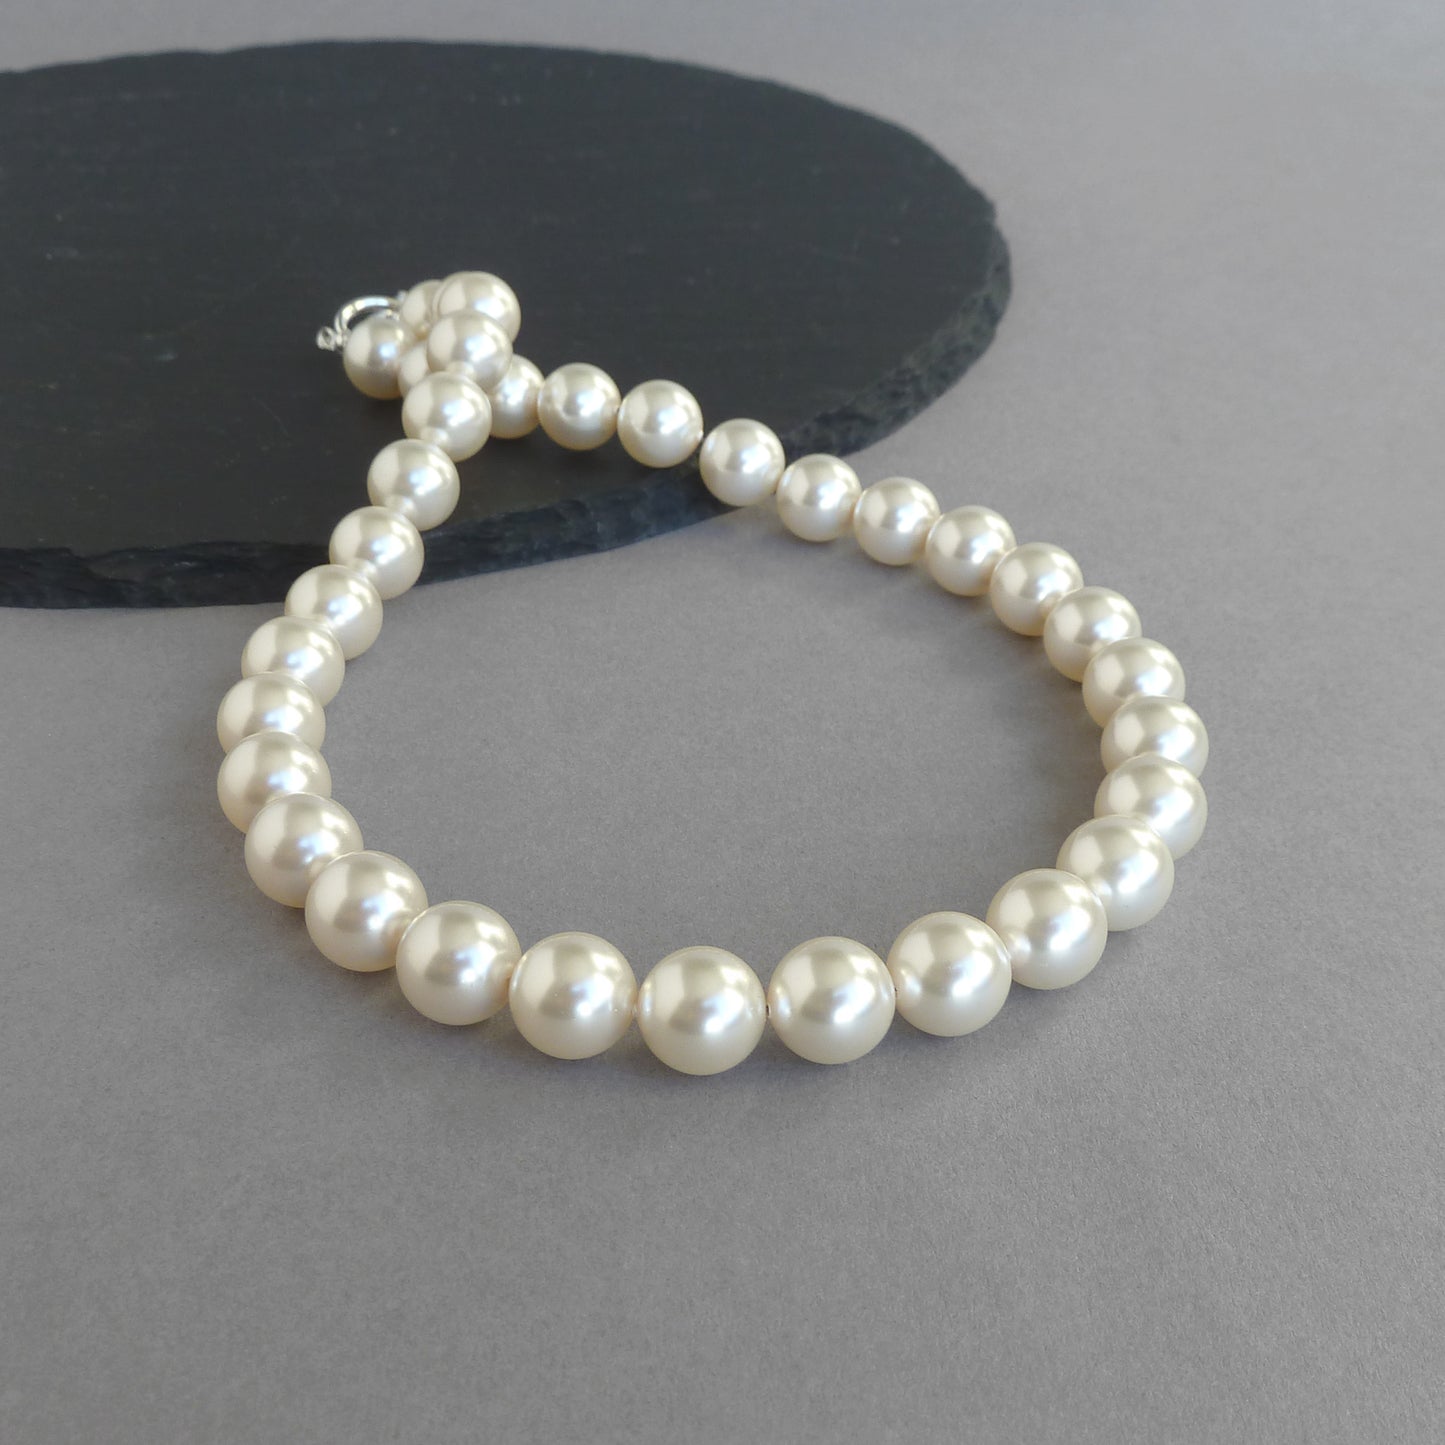 Large cream pearl necklace